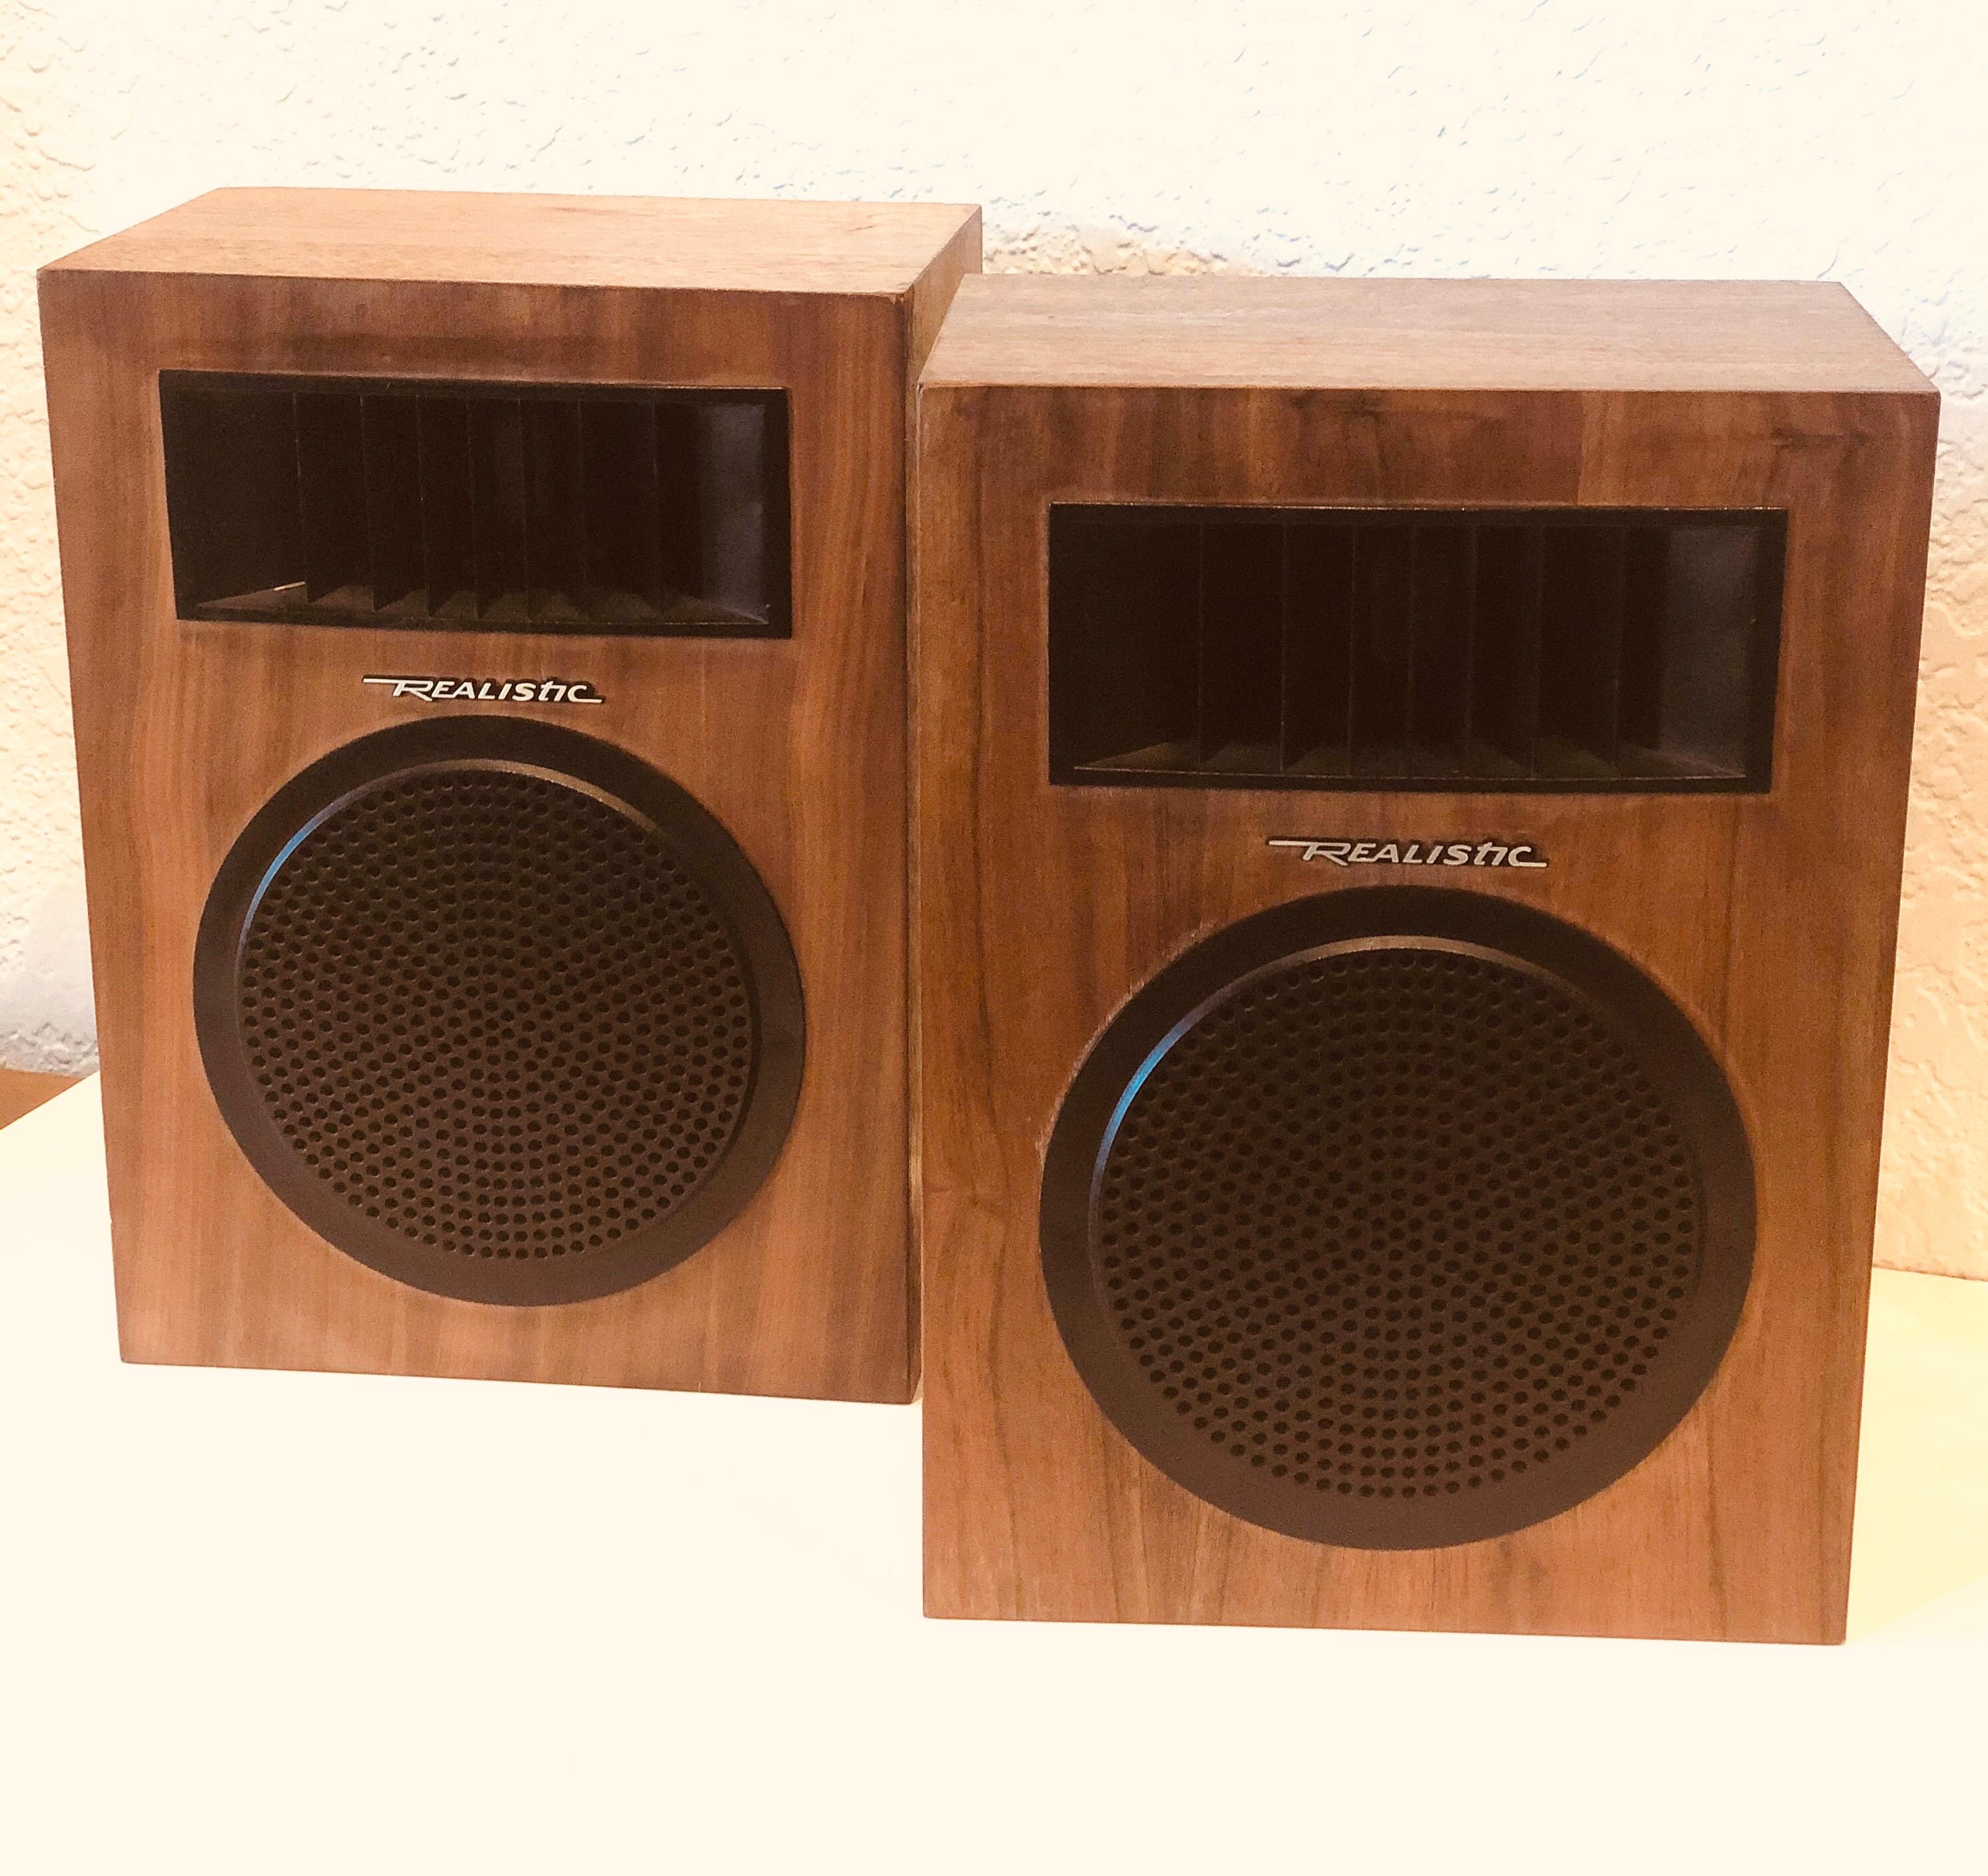 A very cool great-looking speakers by Realistic circa 1980s nice walnut cases, and in working condition we have cleaned and oiled the boxes some little chips nothing major, can be used with RCA cables or directly to the speaker as shown versatile